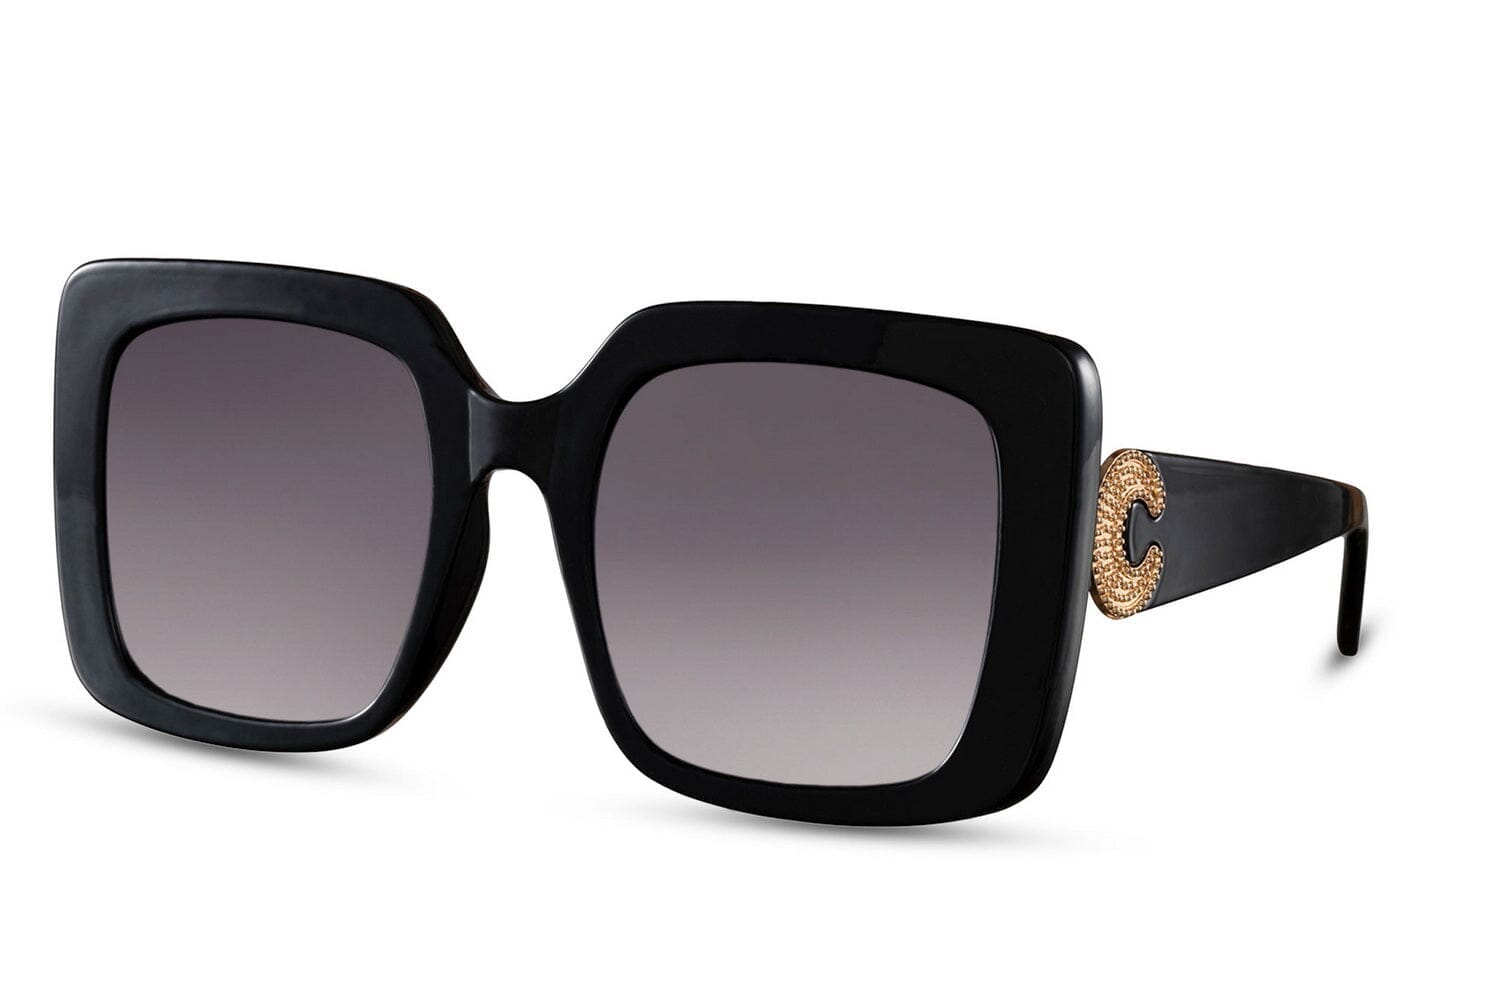 Black square glasses. Gold embellised detail on the sides. Acetate material. UV400 protected.